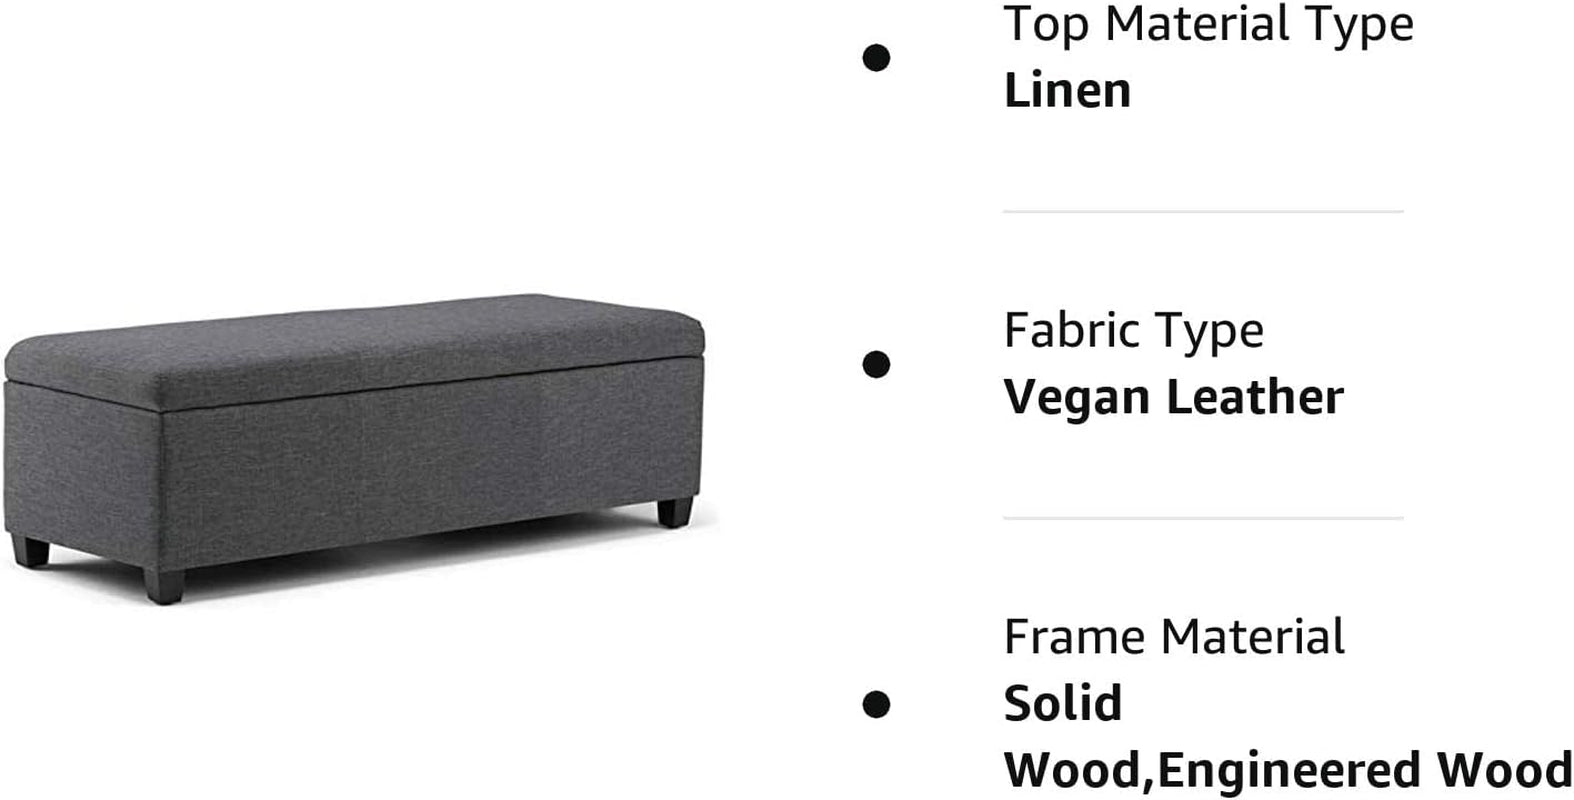 48 Inch Wide Rectangle Lift Top Storage Ottoman Bench in Slate Grey Upholstered Linen Look Fabric with Generous Storage Capacity"